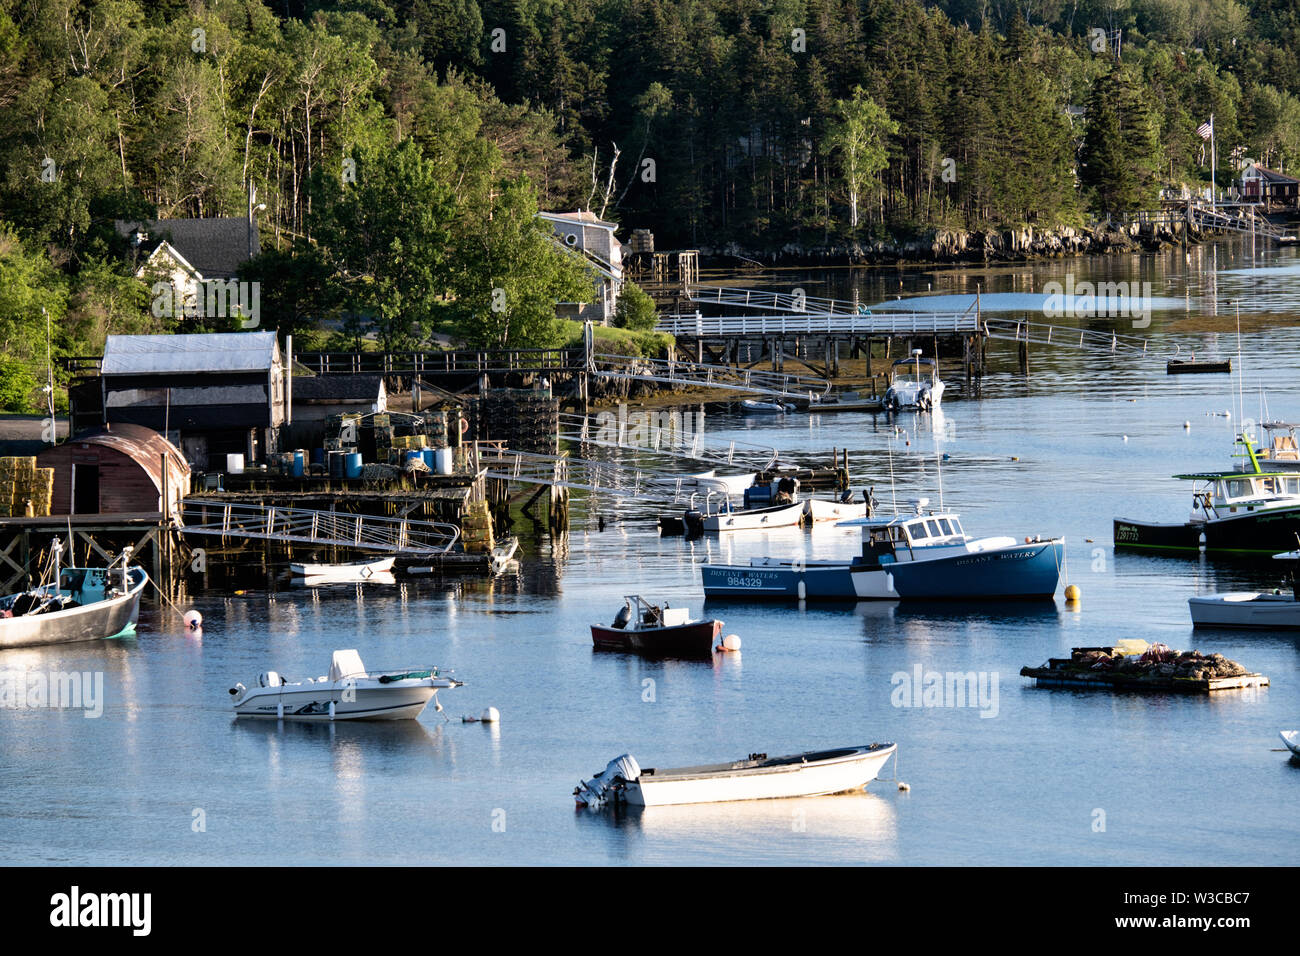 Lobster fishing boats moored in Mackerel Cove, Bailey Island on a summers day in Harpswell, Maine. Stock Photo